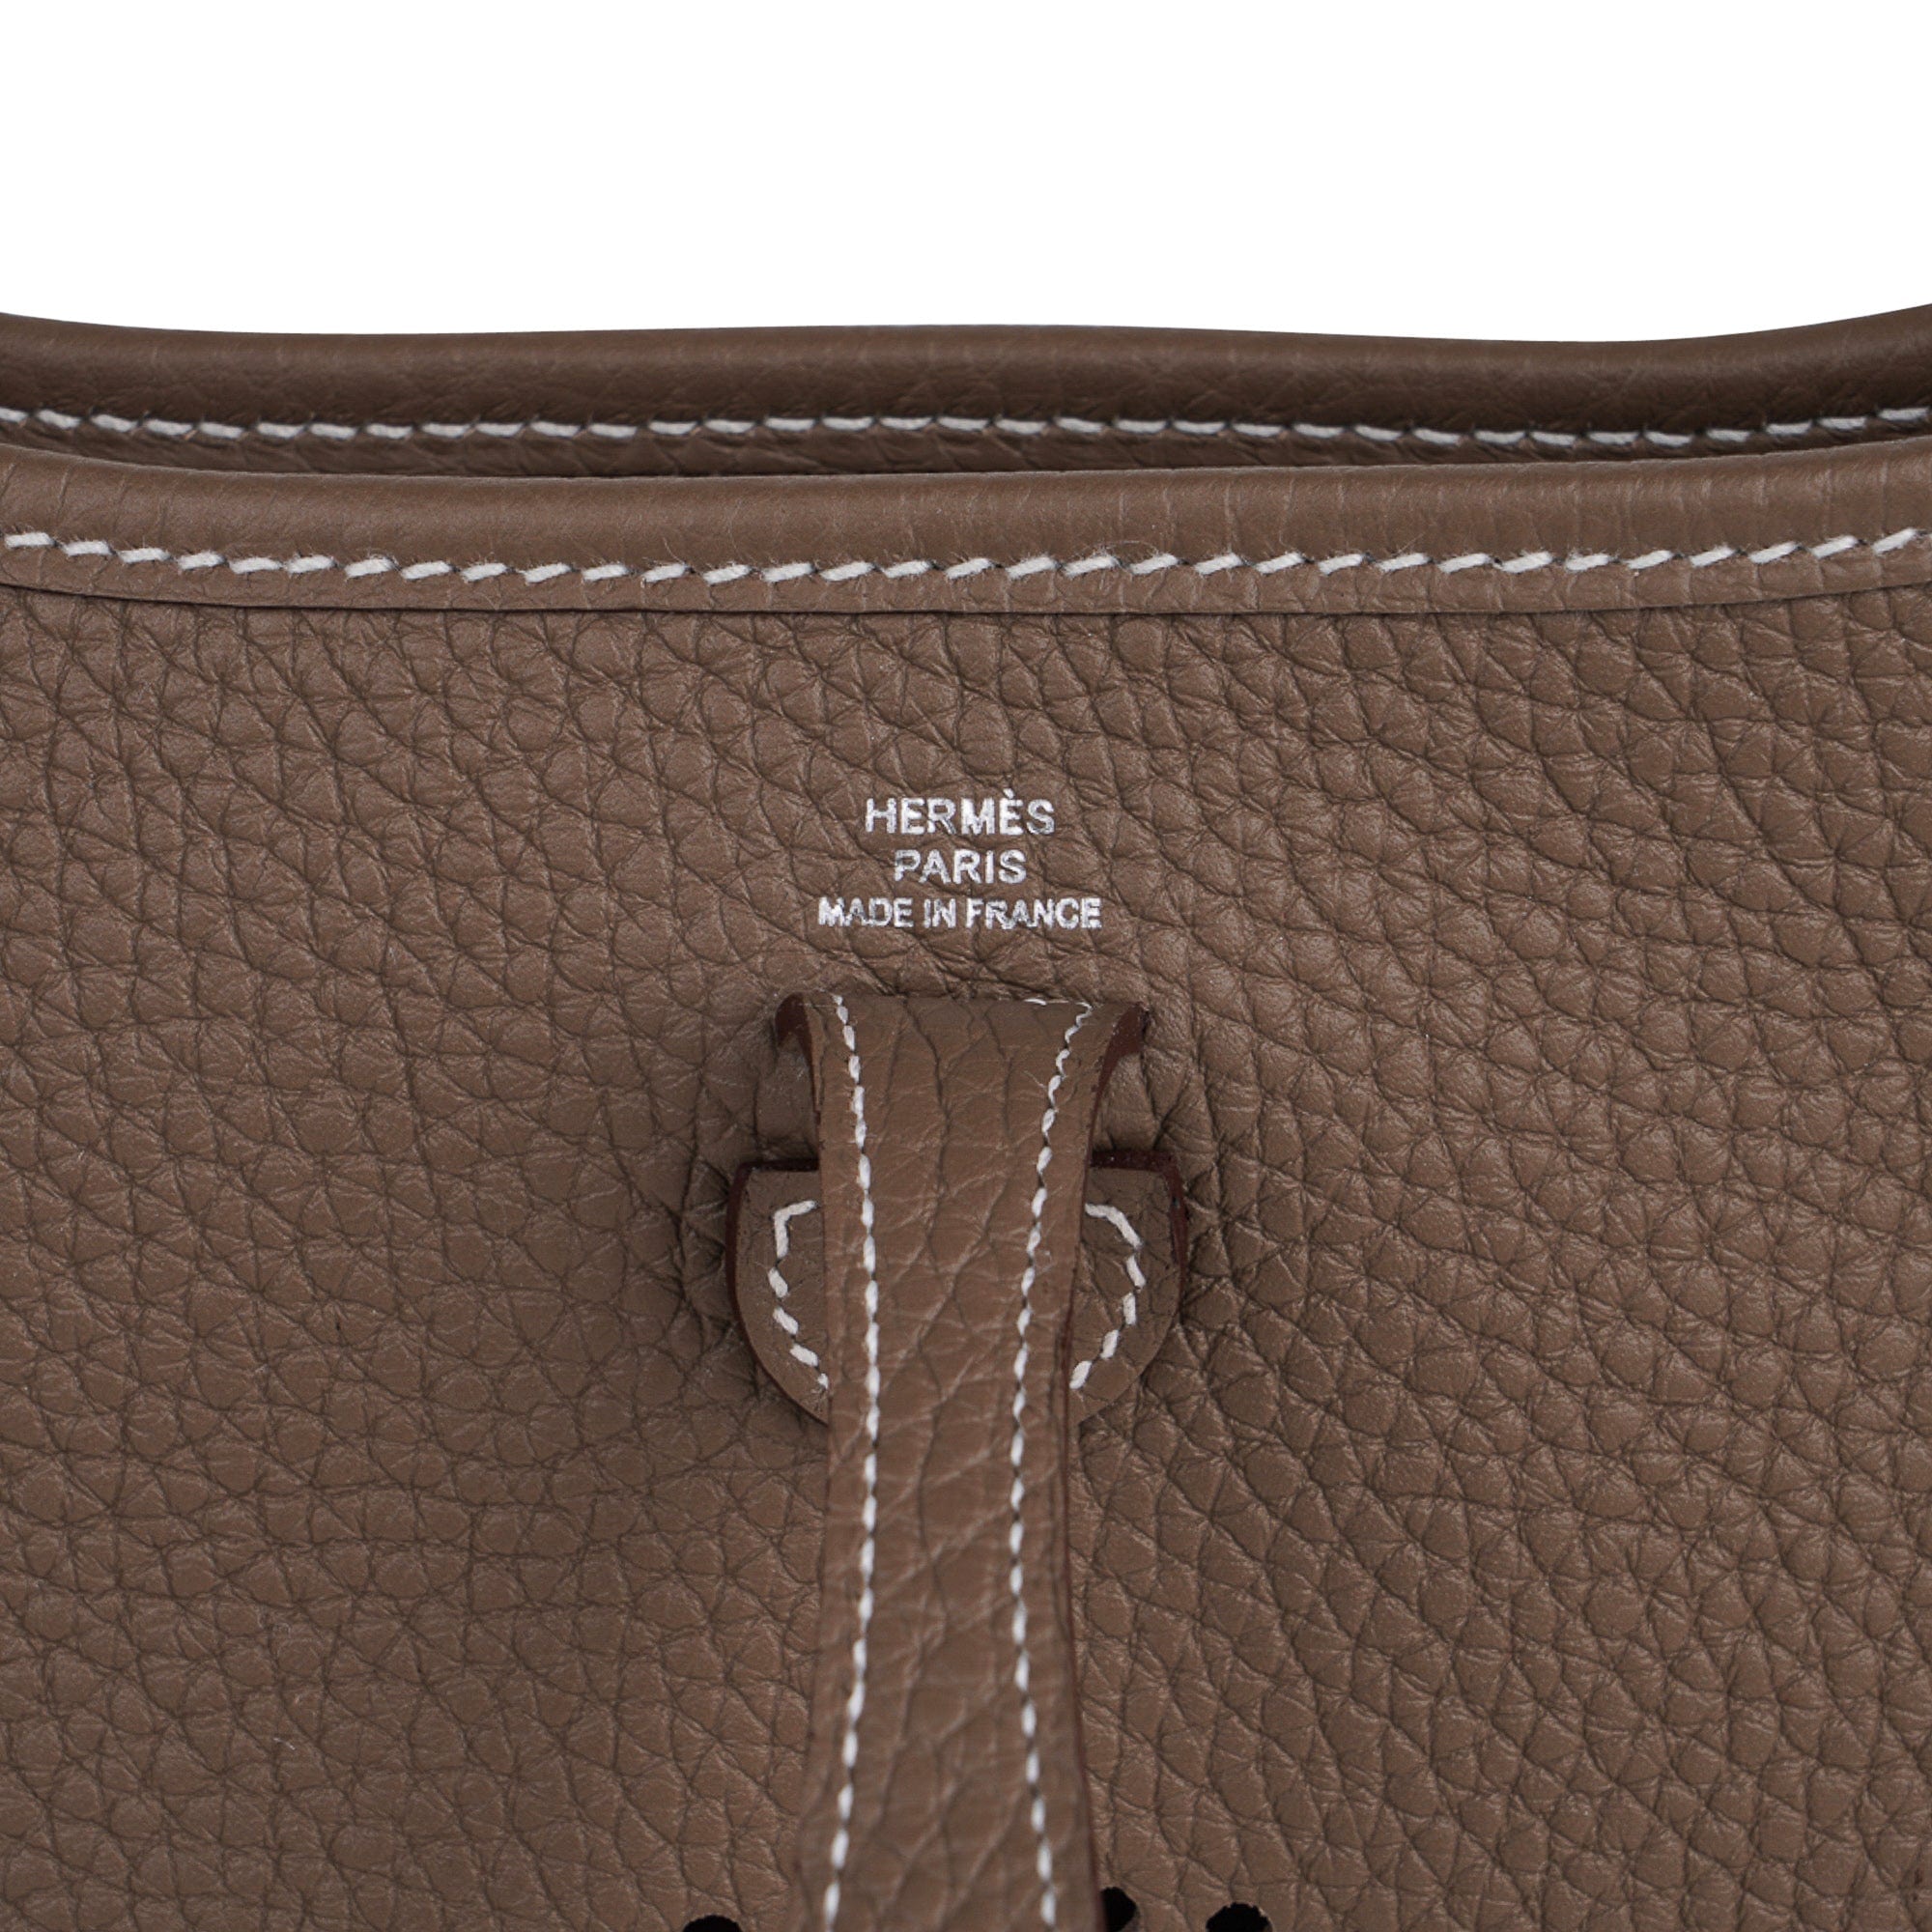 Hermes Evelyne PM Trench Bag Gold Hardware Clemence Leather – Mightychic